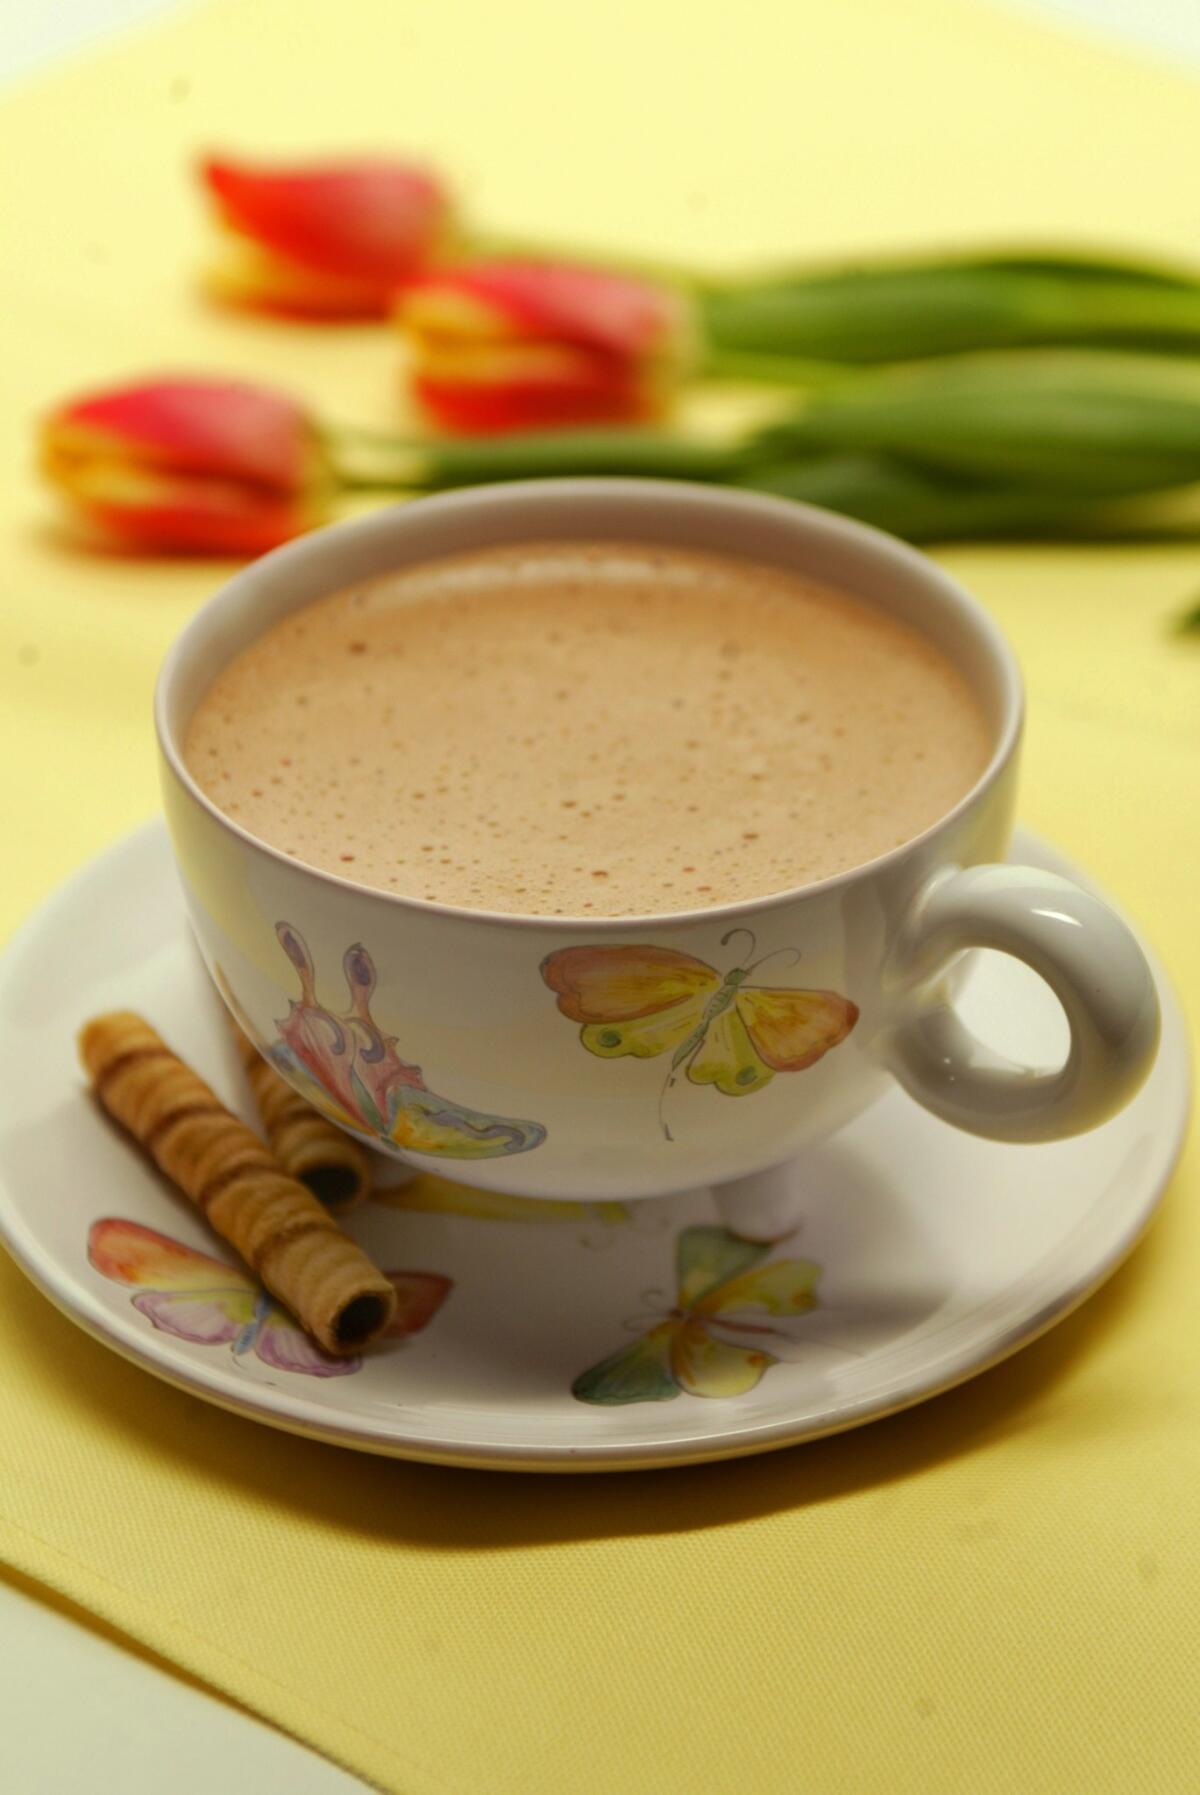 A new study found that drinking hot cocoa may improve brain function.